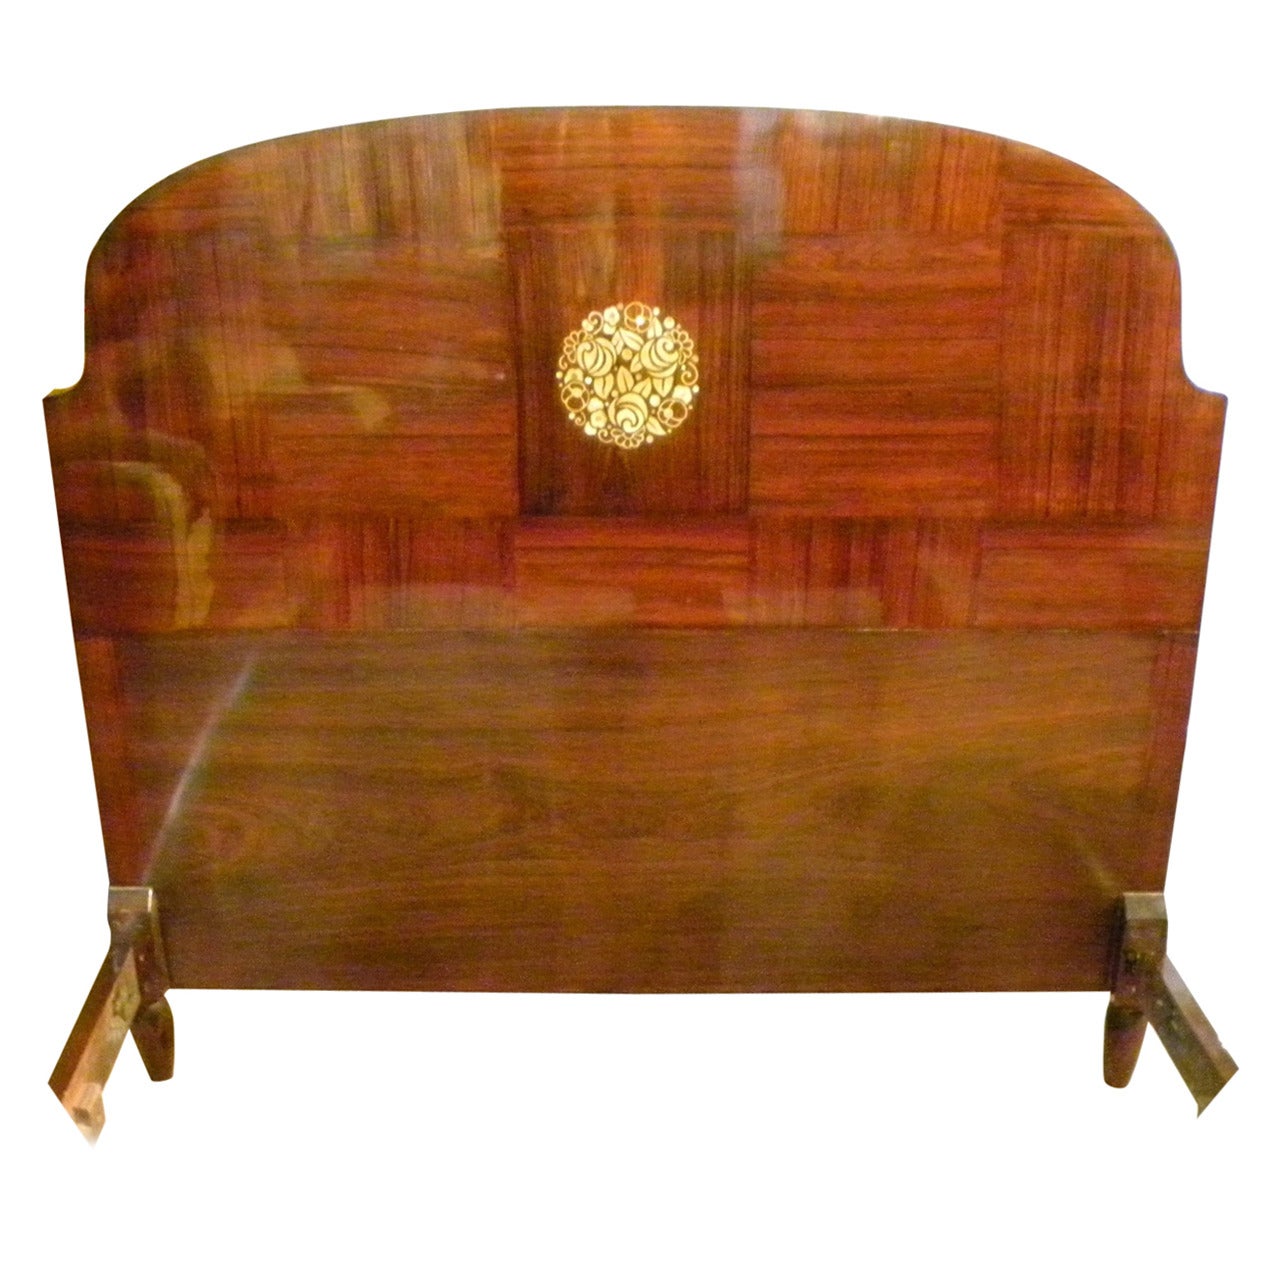 Beautiful Mahogany Art Deco Bed with Marquetry from the 1920s